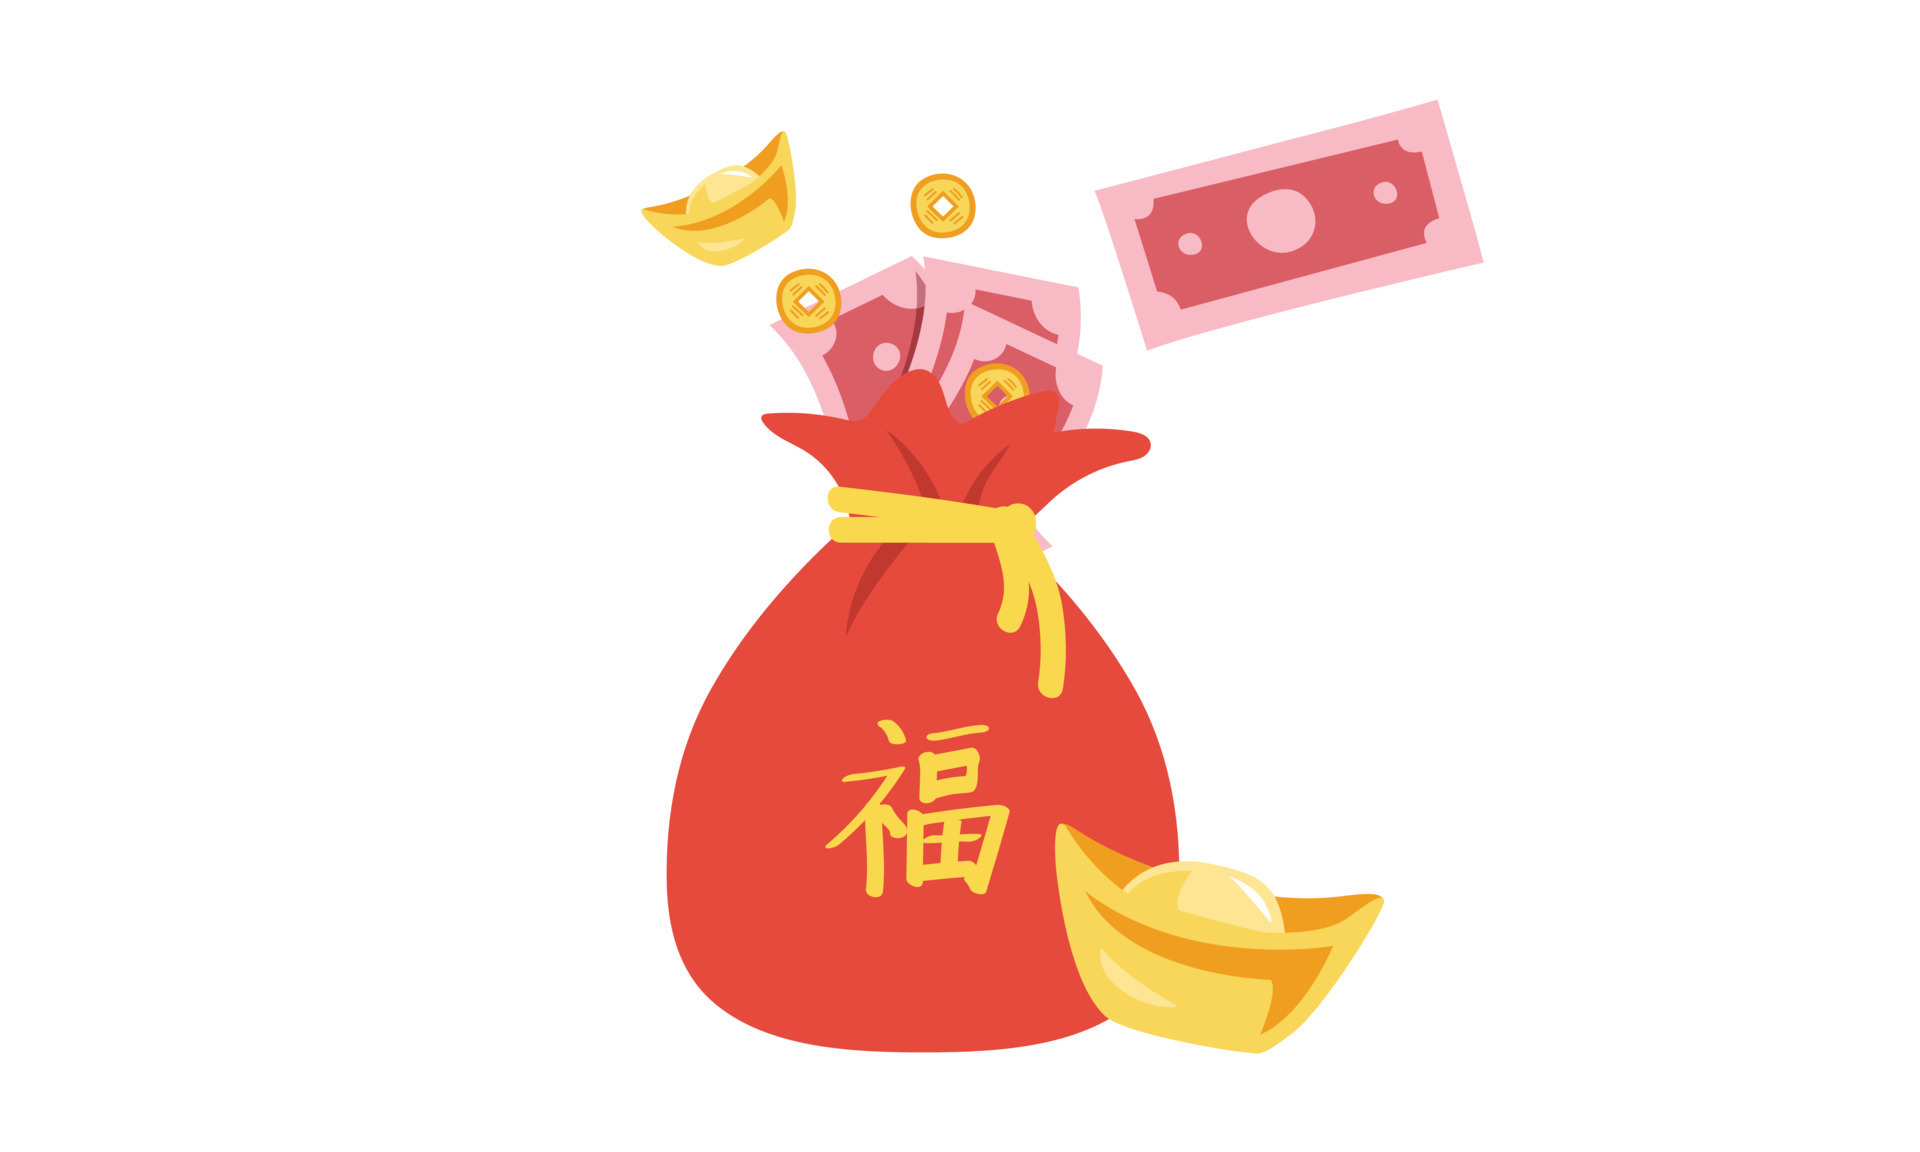 Chinese New Year money bag clipart. Simple red bag full of paper money,  coins and golden ingot flat vector illustration cartoon drawing. Chinese  text means Good Luck. Asian Lunar New Year concept